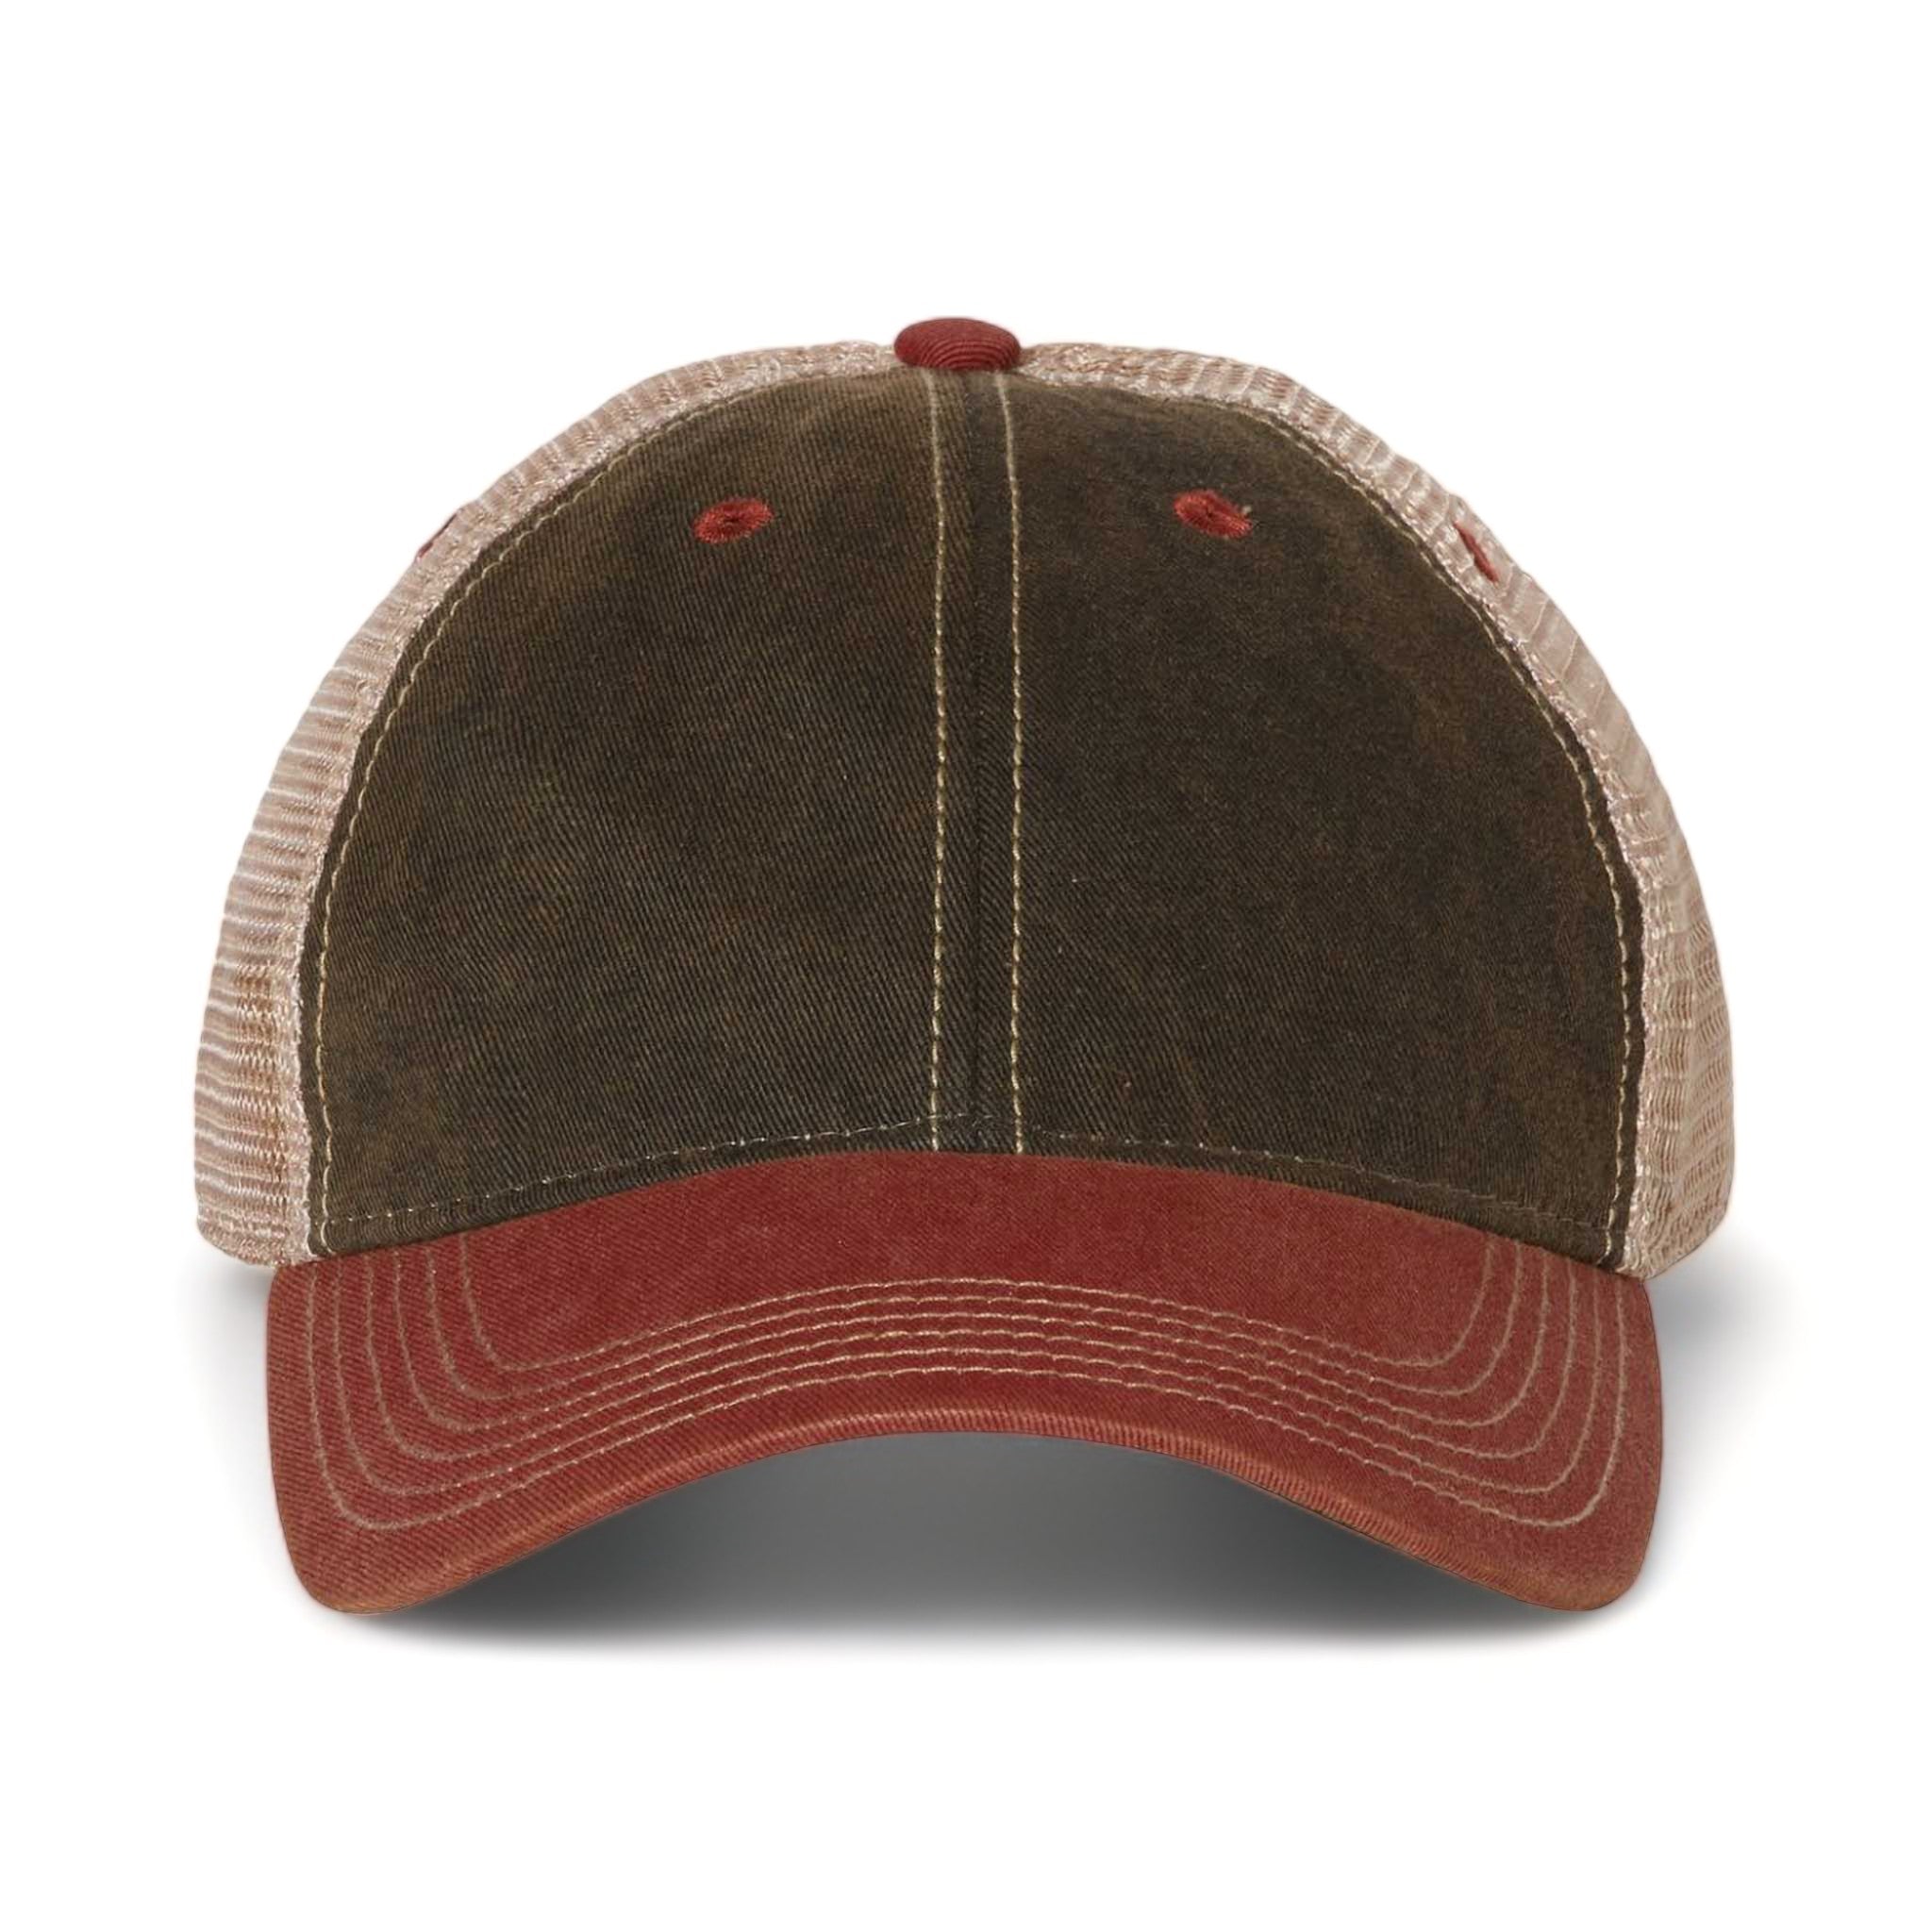 Front view of LEGACY OFA custom hat in black, cardinal and khaki